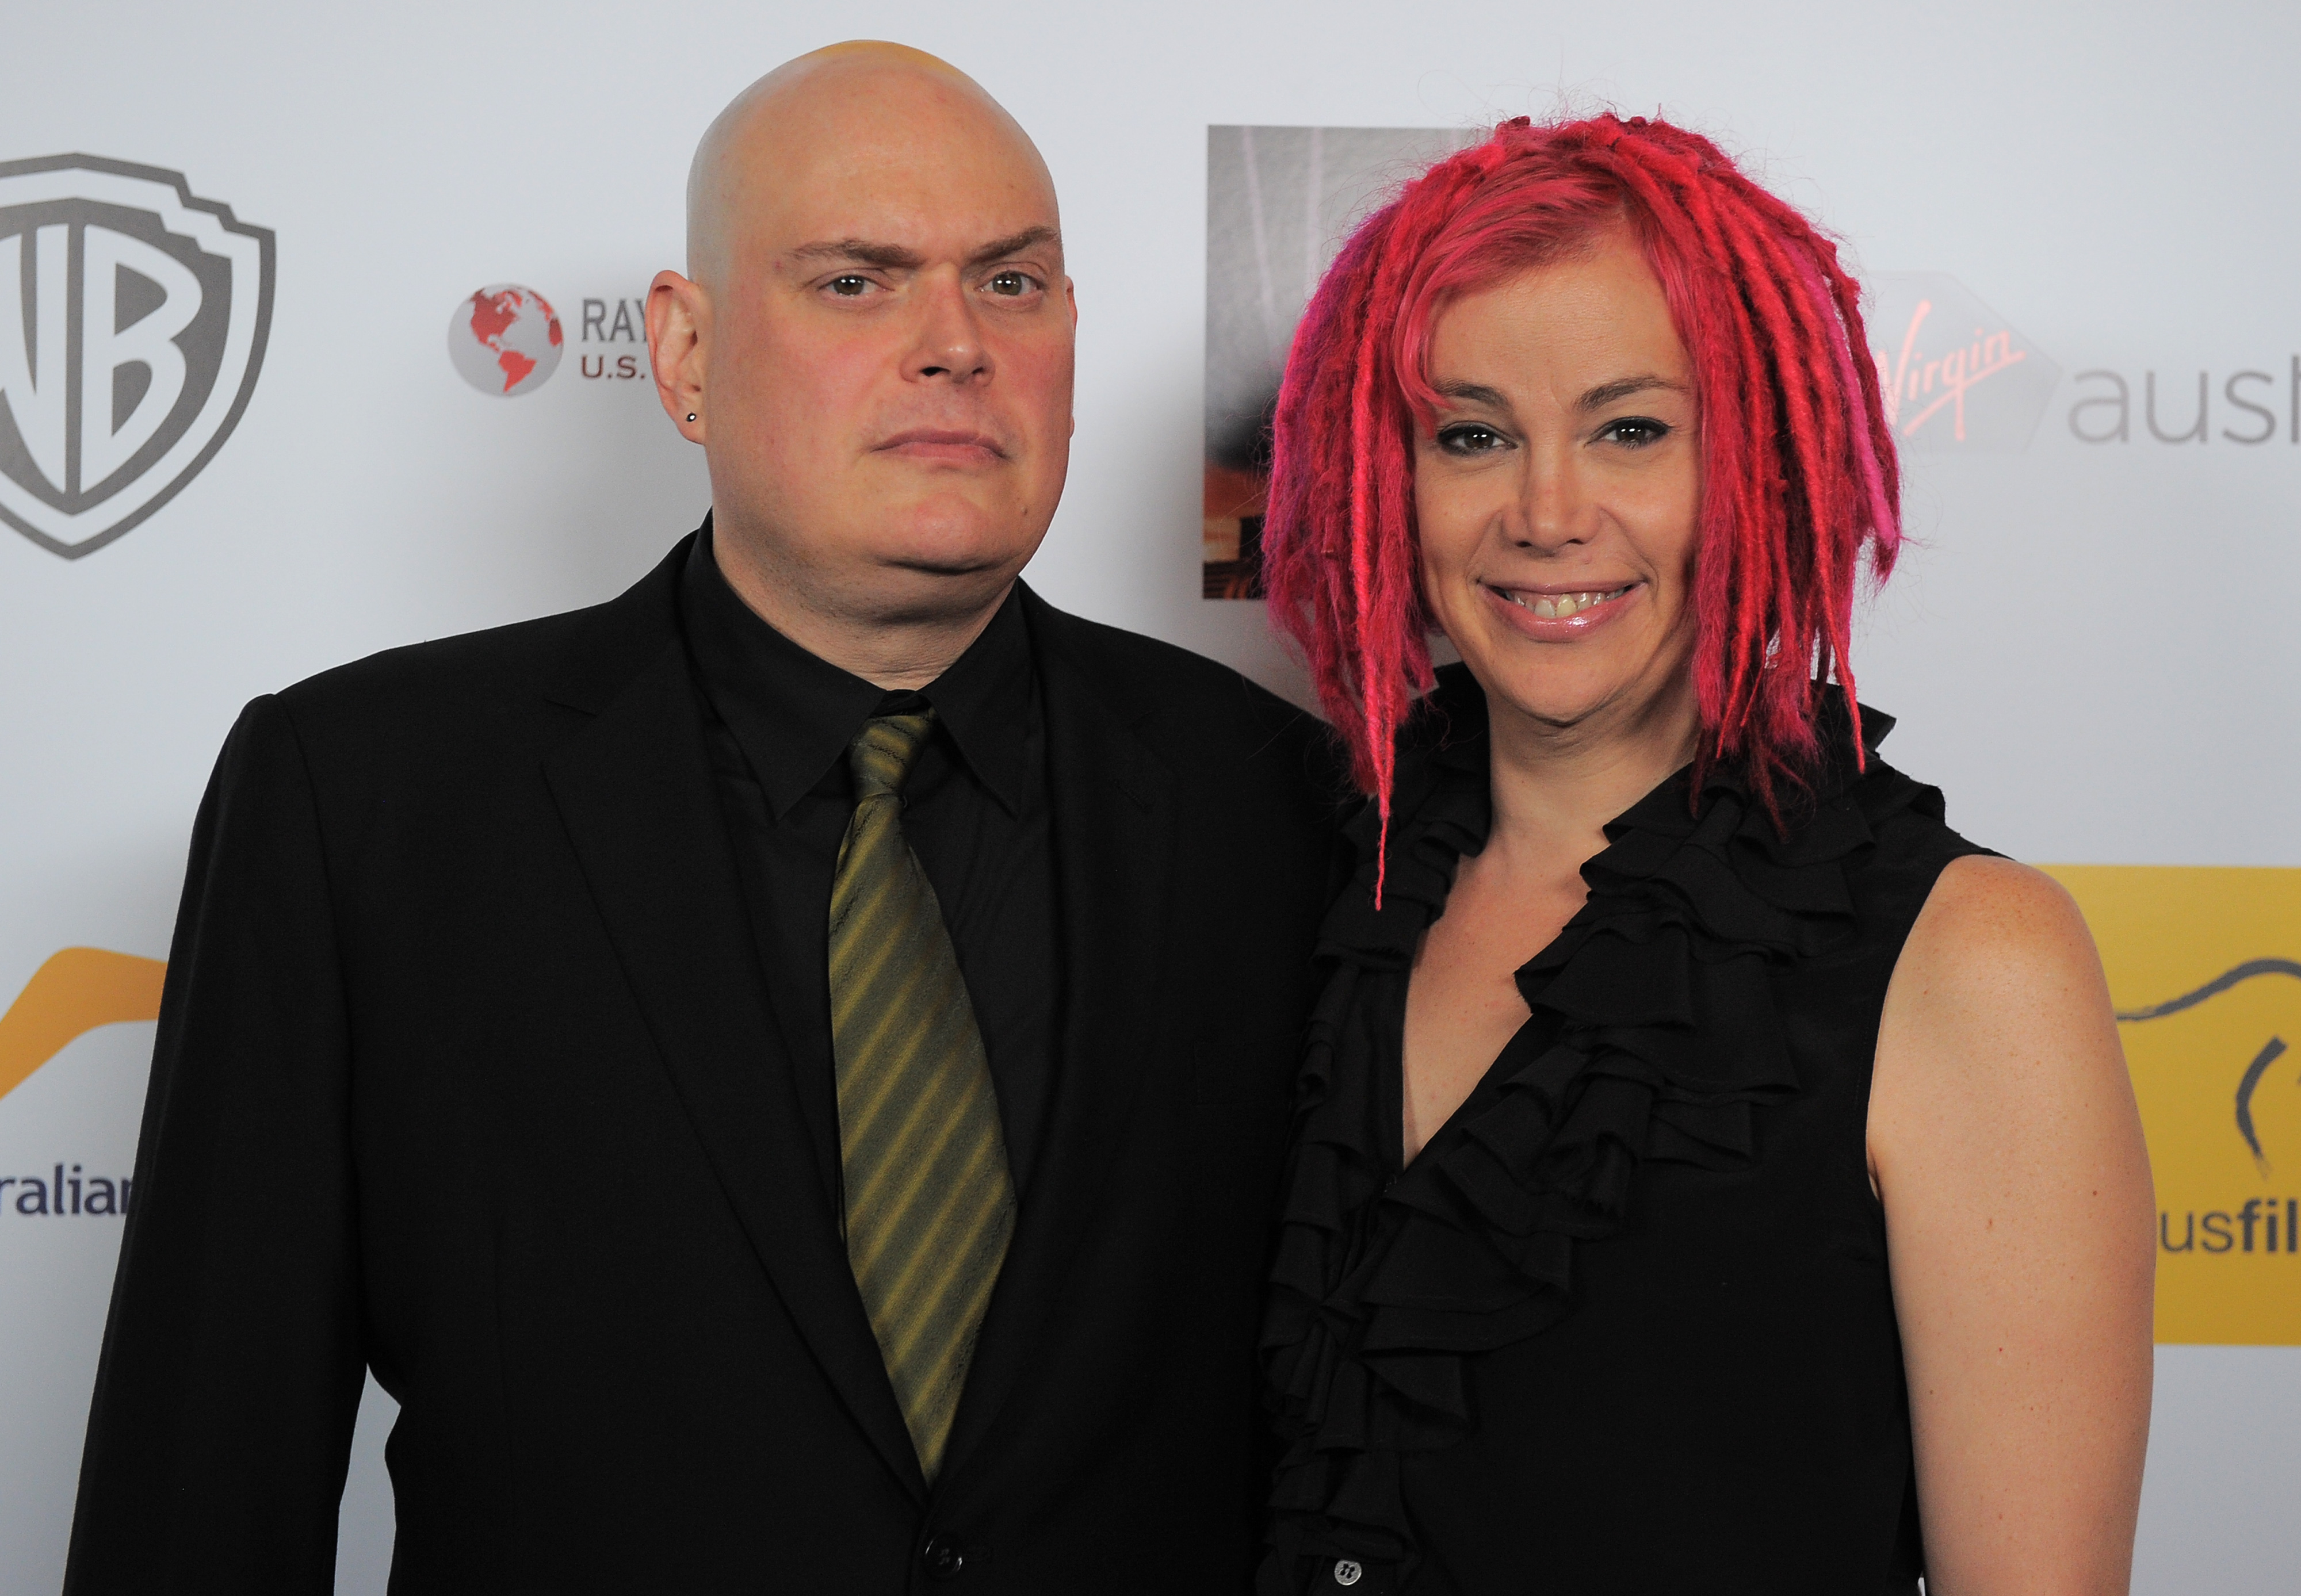 Lilly Wachowski (formerly known as Andy) and Lana Wachowski (formerly known as Larry) attend the 2nd Annual Australians in Film Awards Gala at Intercontinental Hotel on October 24, 2013, in Beverly Hills, California. | Source: Getty Images